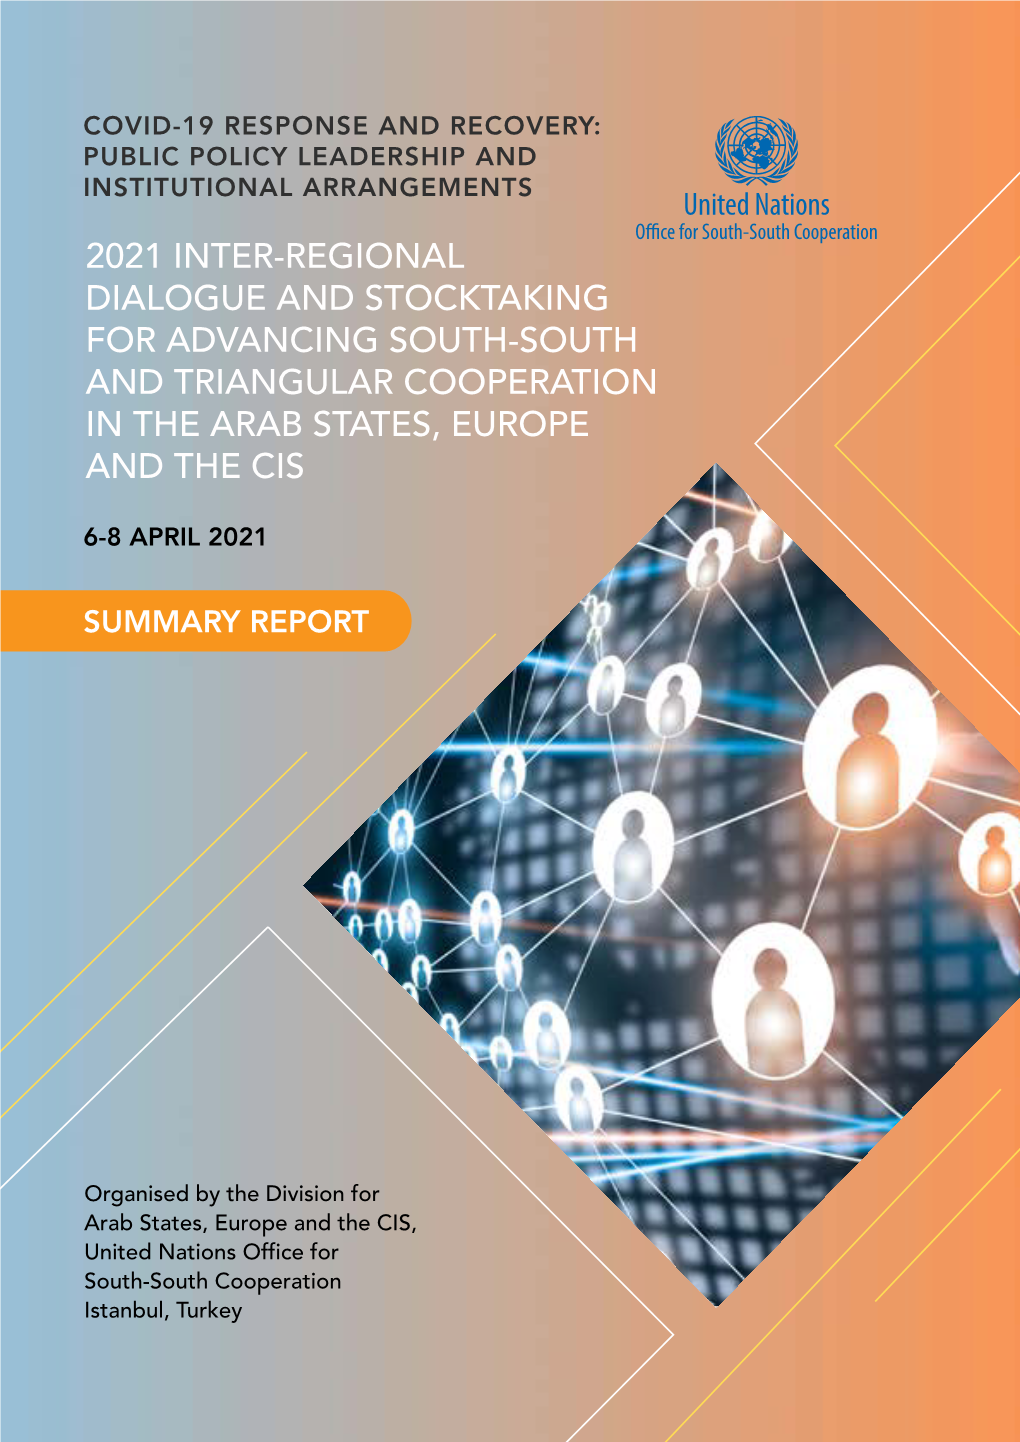 2021 Inter-Regional Dialogue and Stocktaking for Advancing South-South and Triangular Cooperation in the Arab States, Europe and the Cis